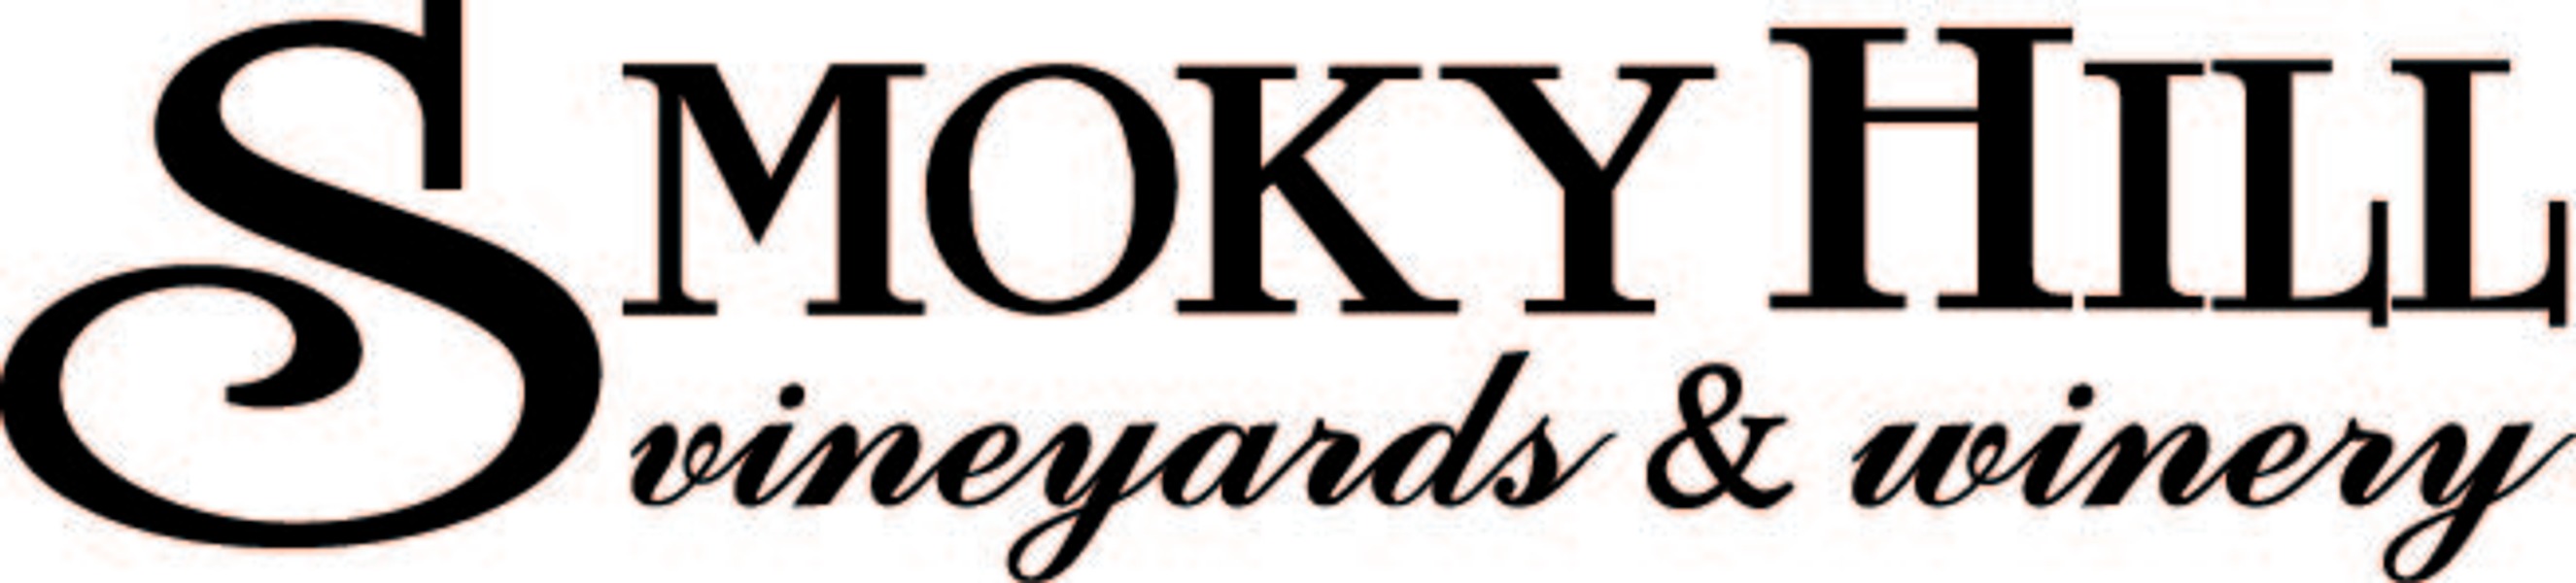 Brand for Smoky Hill Vineyards & Winery